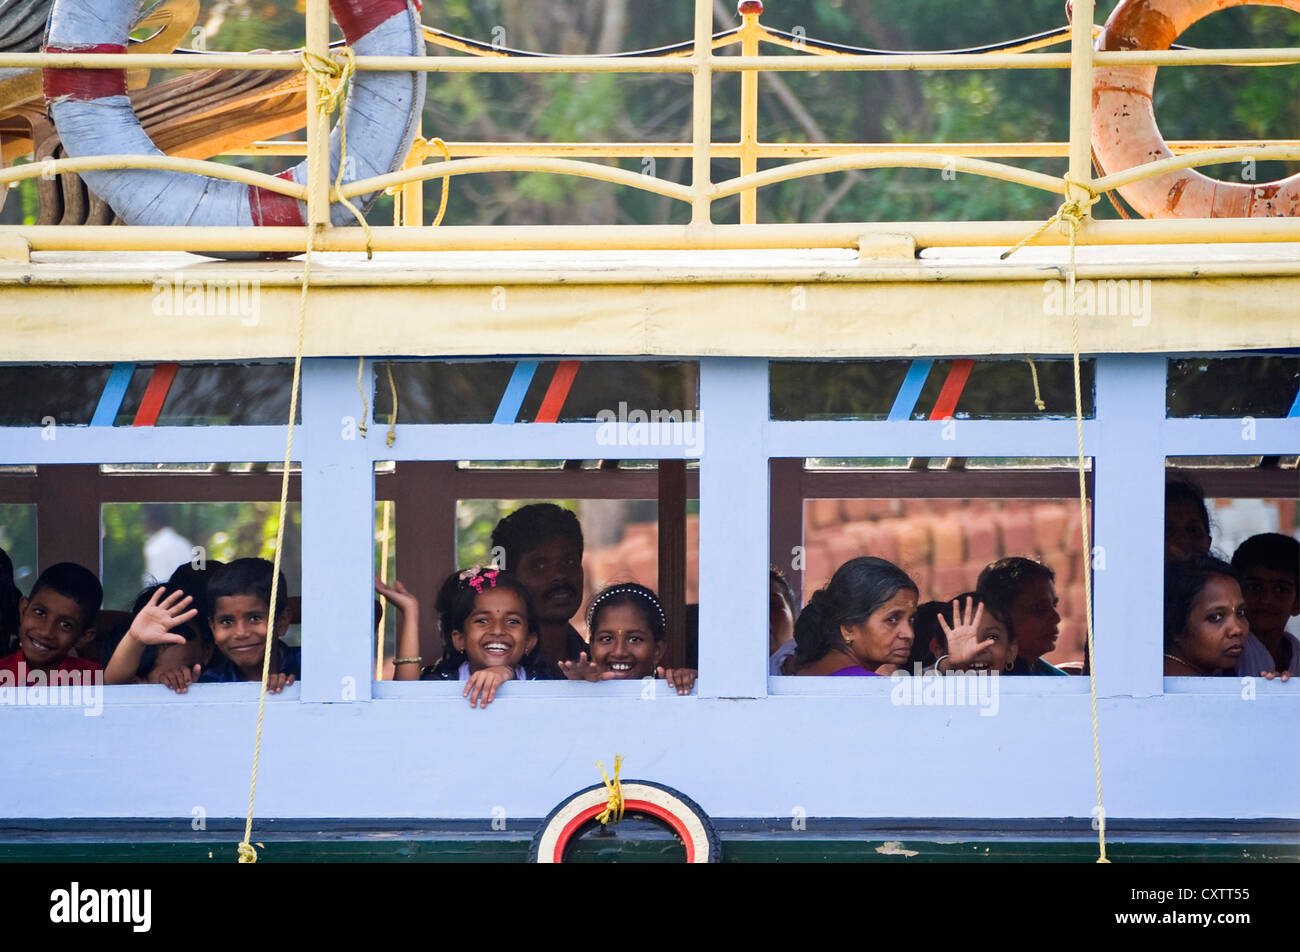 Horizontal view of school children waving and smiling from a public ferry in the backwaters of Kerala. Stock Photo